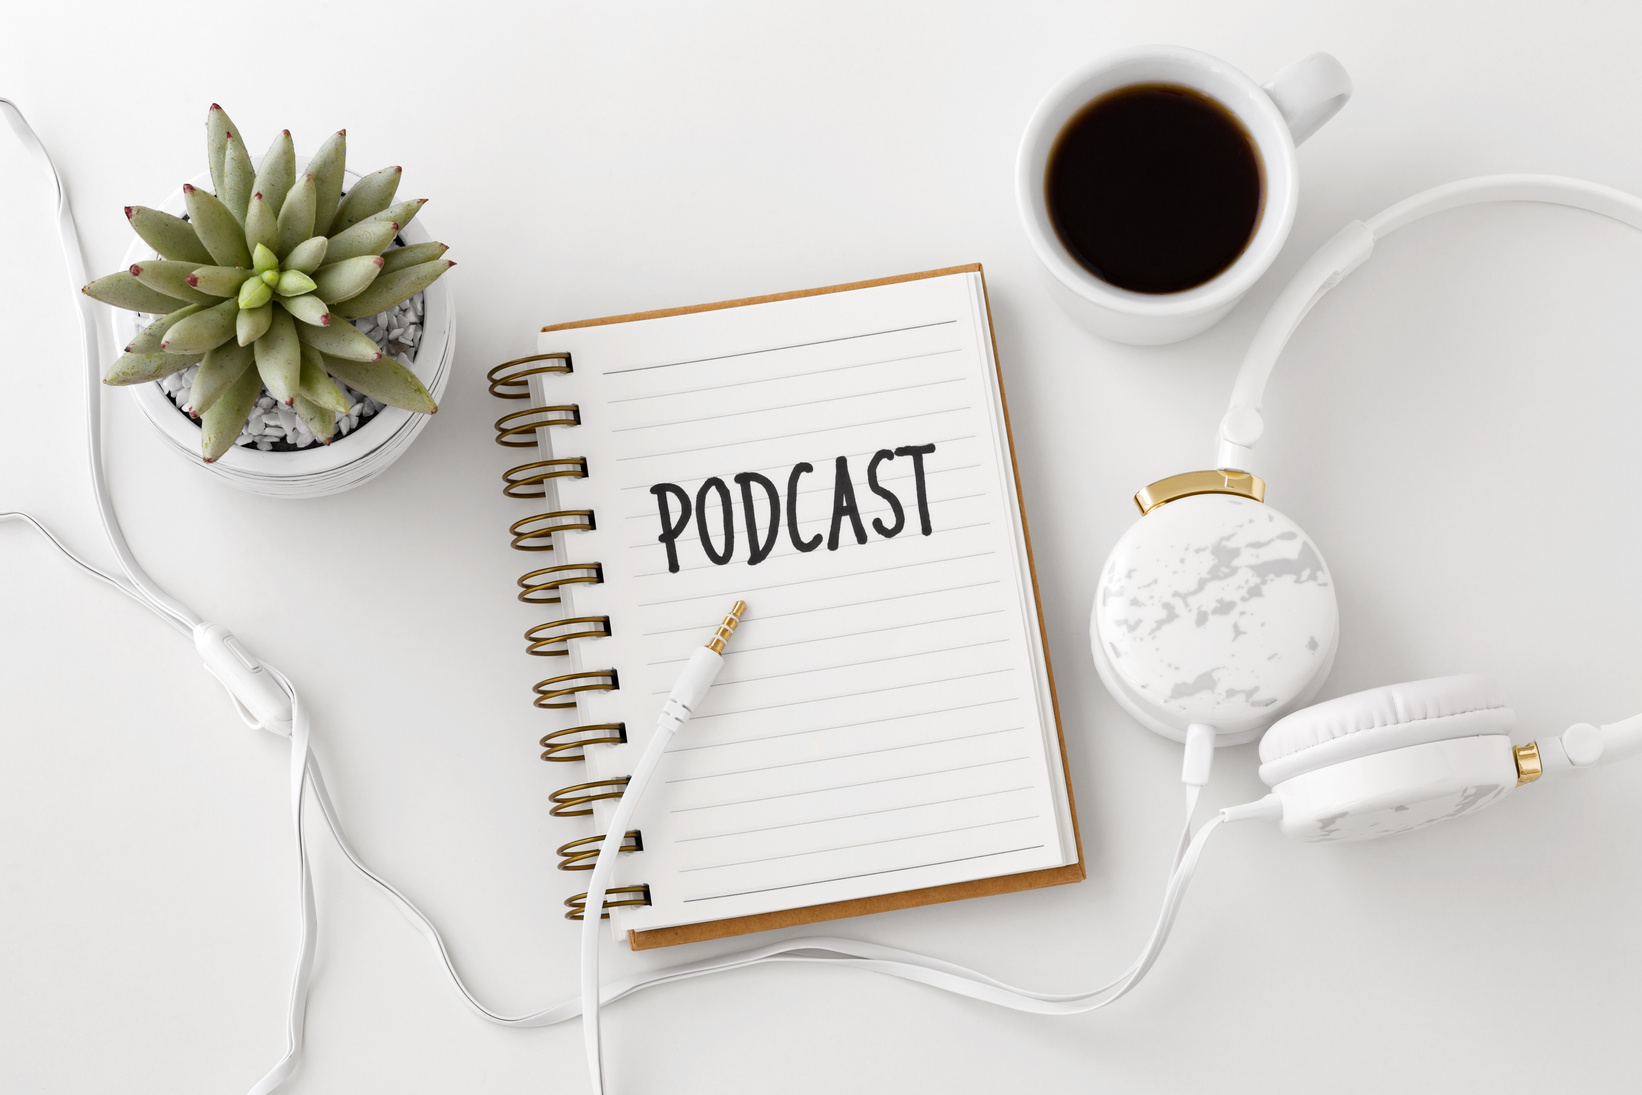 Podcast concept with headphones and notebook